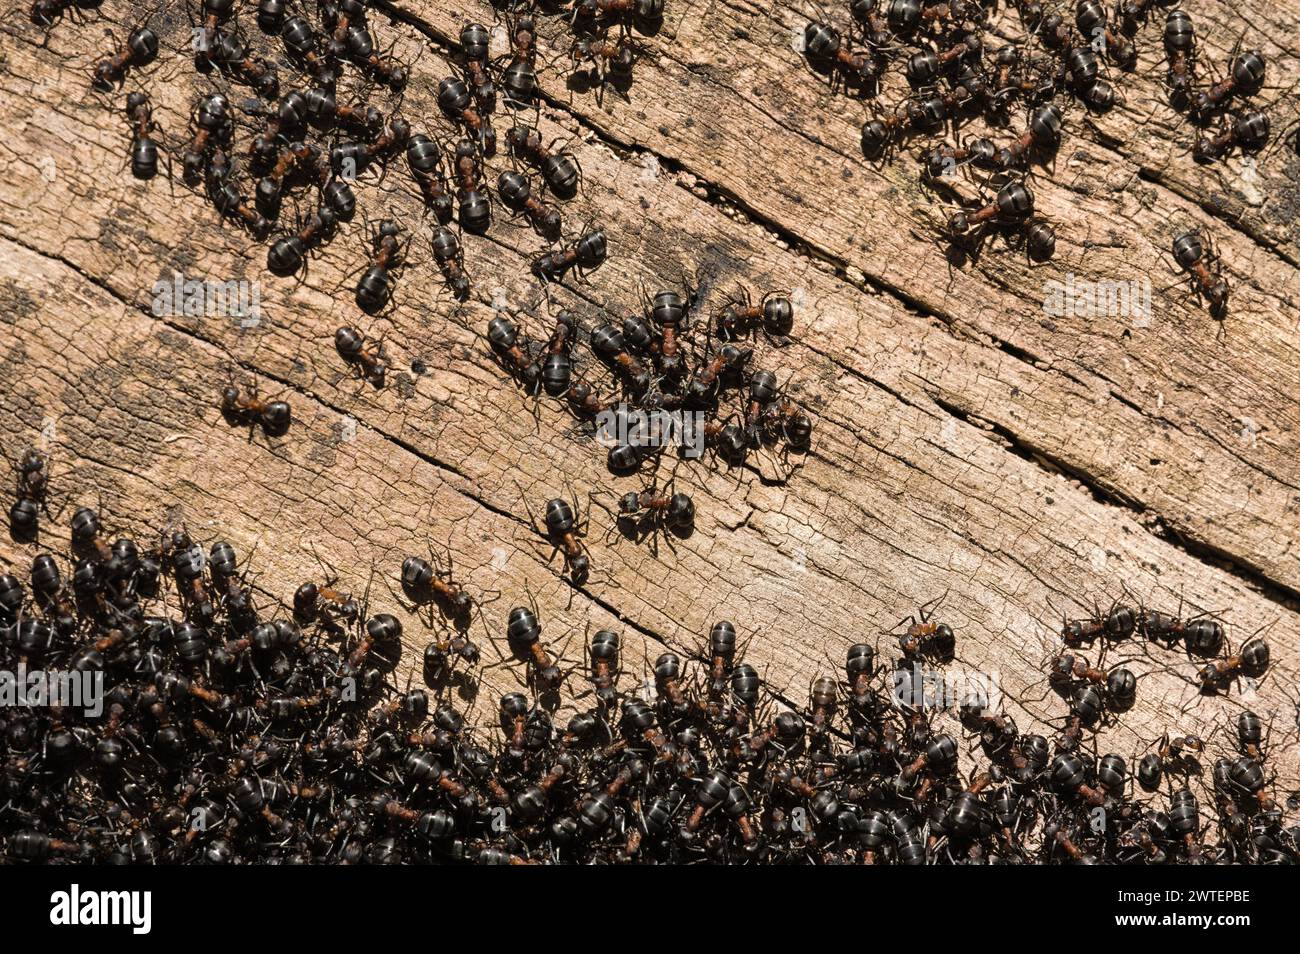 Swarming in ant colony nest. Thousands of black ants. Czech republic nature. Anthill in the forest. Stock Photo